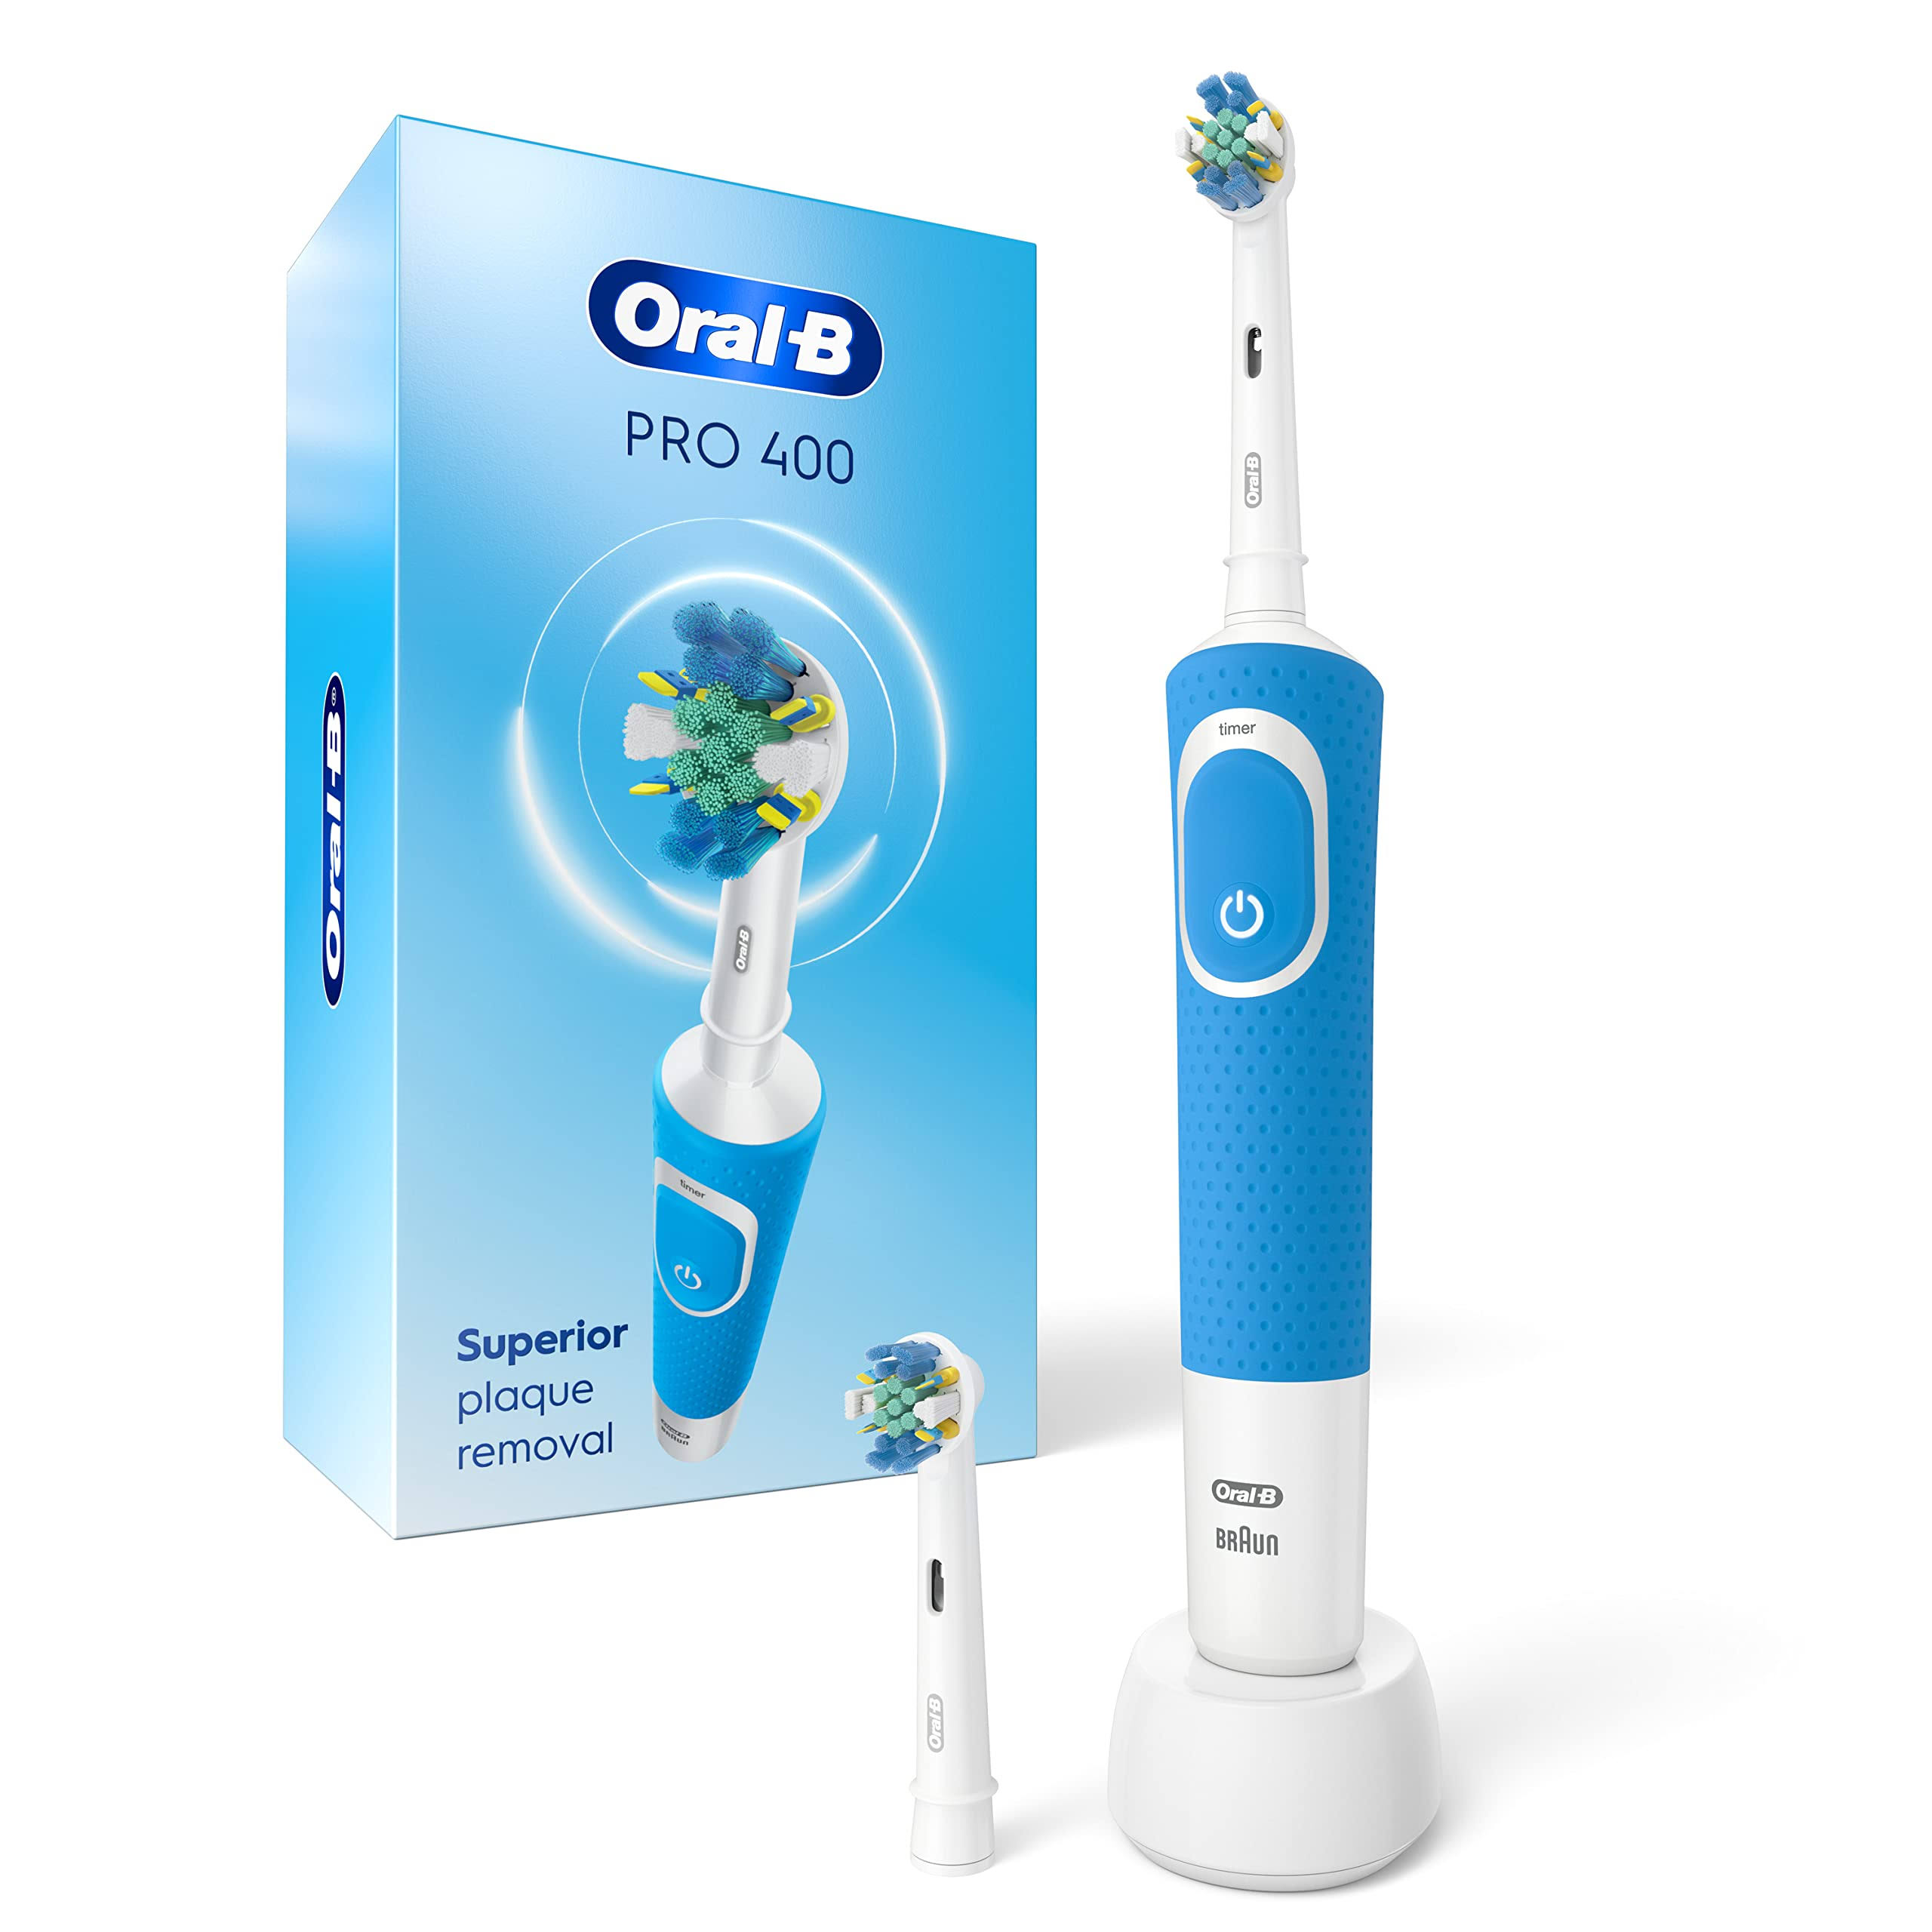 Oral B Pro 400 Floss Action Vitality Electric Toothbrush with (2) Brush Heads, Rechargeable, Blue